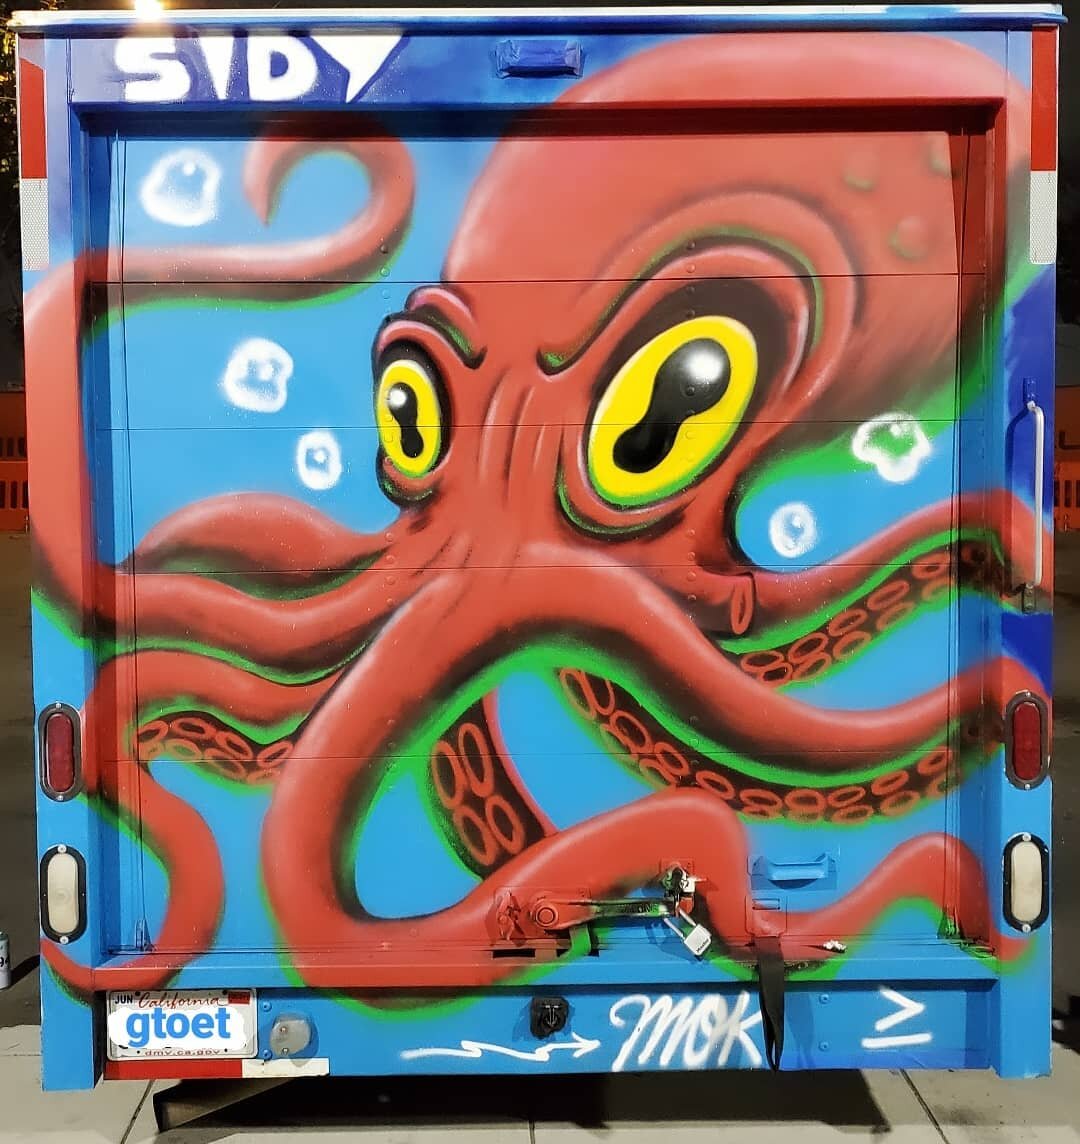 cheeee here's a pic of the quick #octopus I painted on the truck from the previous post.
Big mahalos to @sadclout for letting me get on this. Thanks for looking and have a wonderful day!
#sidyillustrations #Sidy #artistsoninstagram #illustrations #ar